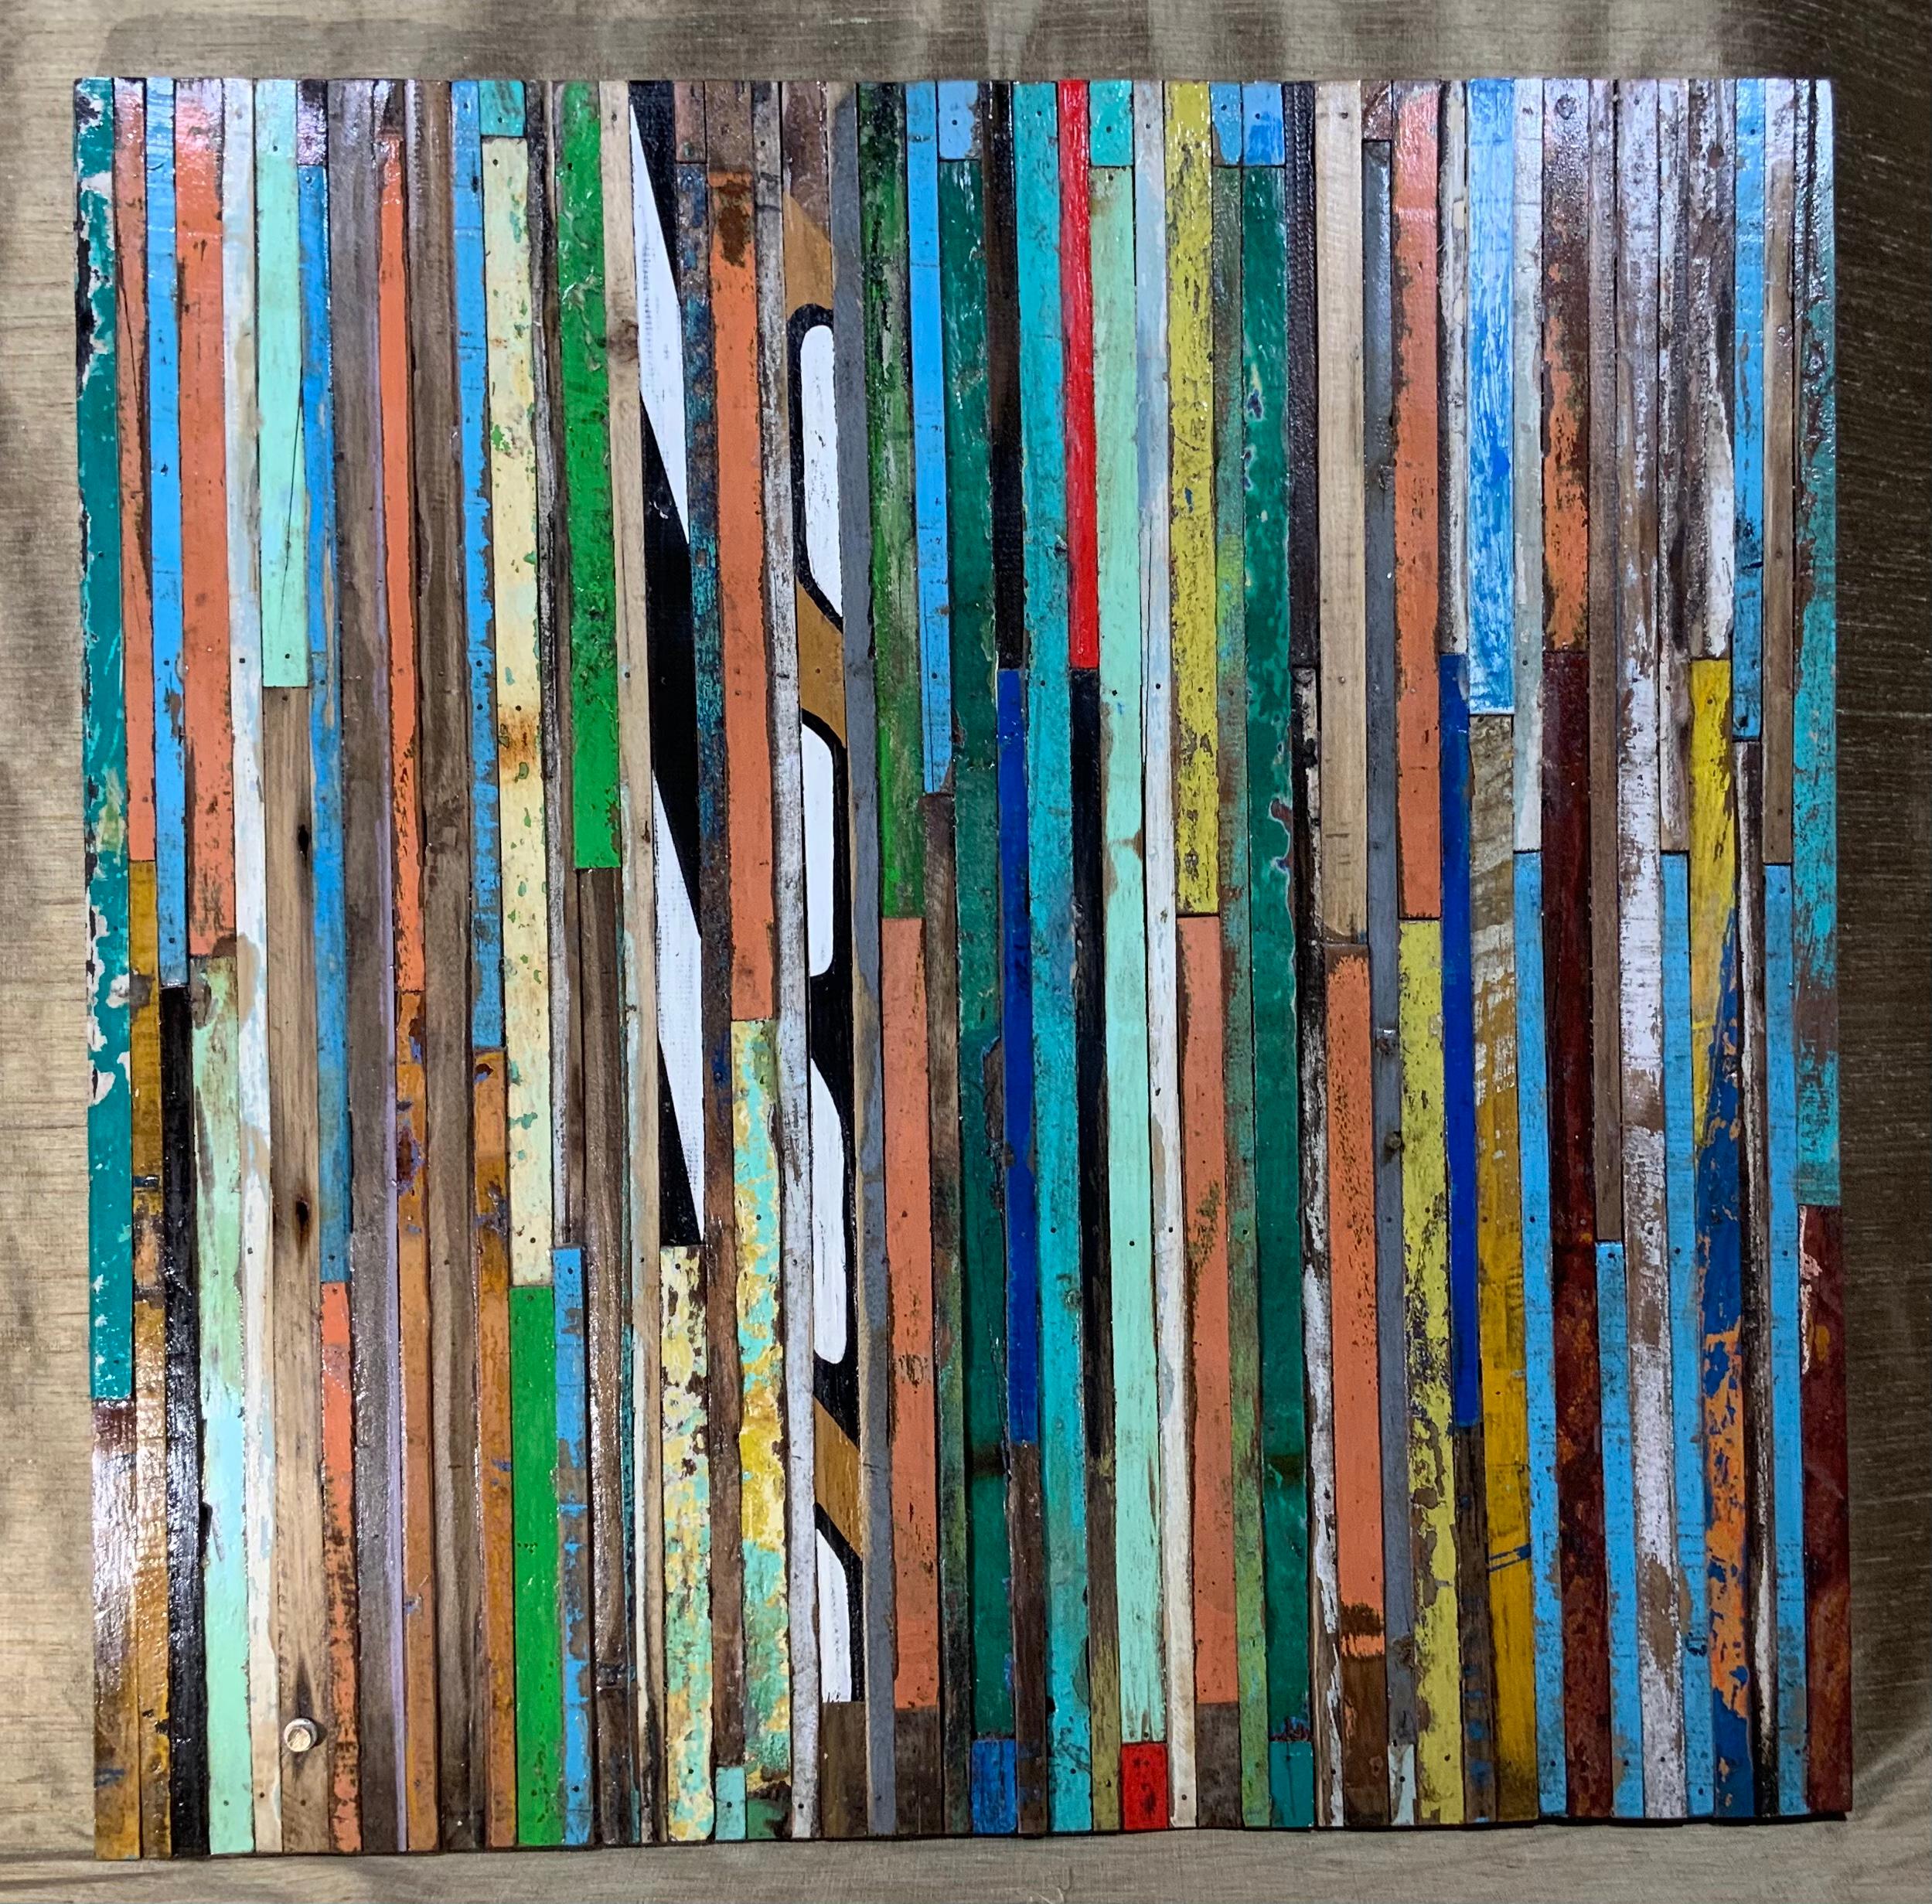 Exceptional wall hanging wood sculpture made of multi-colors reclaimed wood strips cuts, to put together beautiful Mosaic of colors
By unknown artist.
Could be use horizontal or vertical.